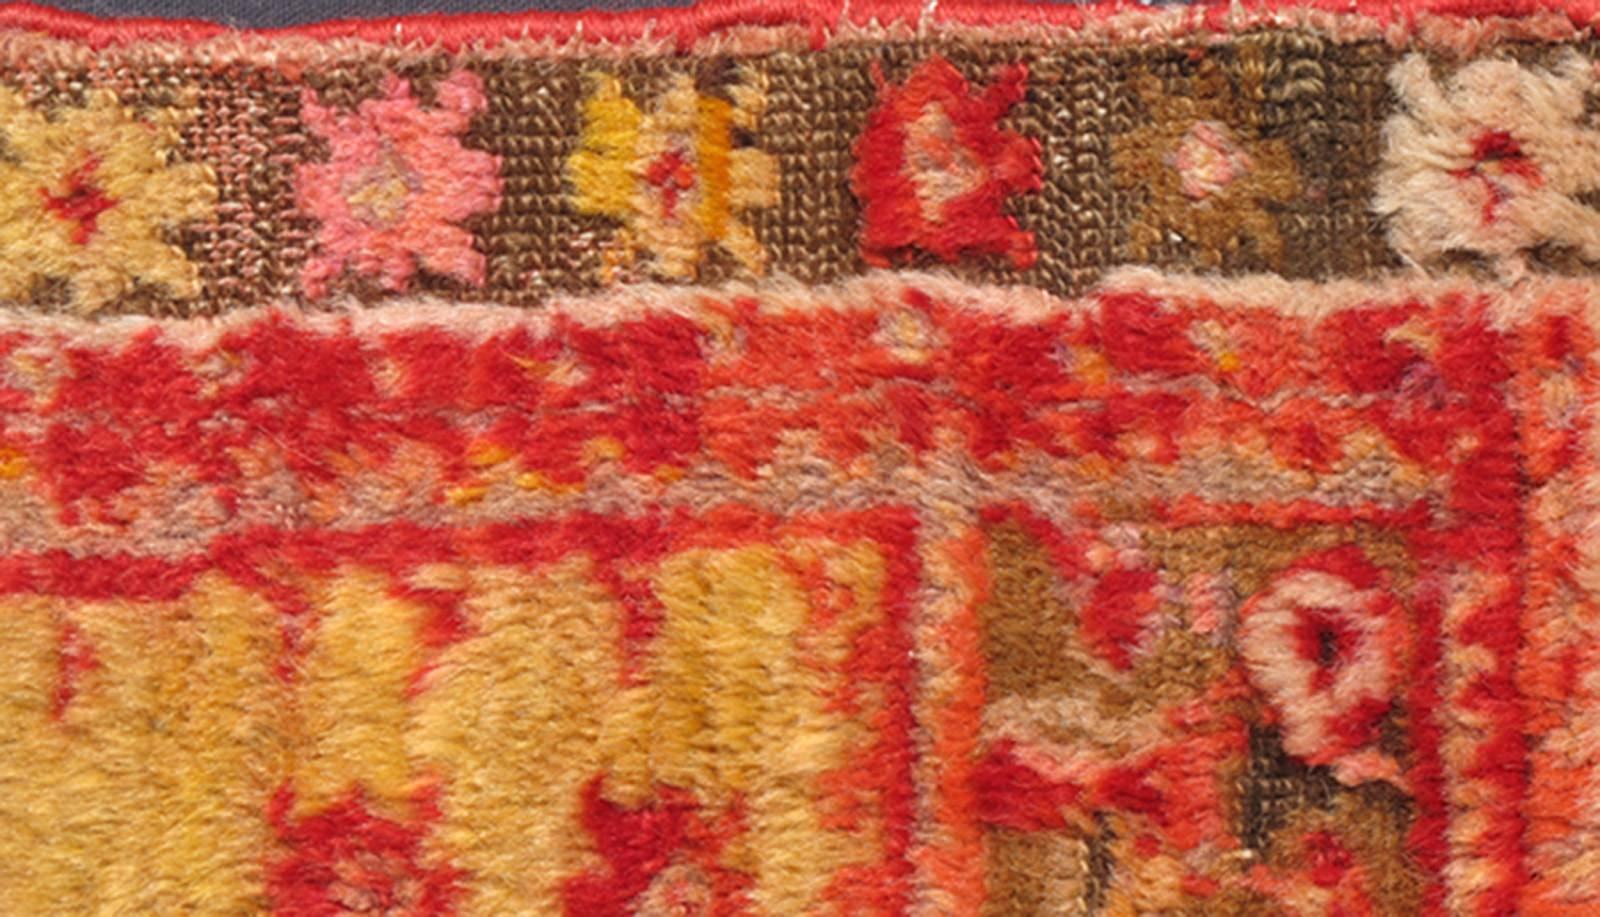 Angora wool antique Turkish Oushak rug with vibrant red, green and gold, Floral Medallion Design, rug S12-0512, country of origin / type: Turkey / Oushak, circa 1910.

Woven with Angora wool, this magnificent Oushak boasts a central medallion